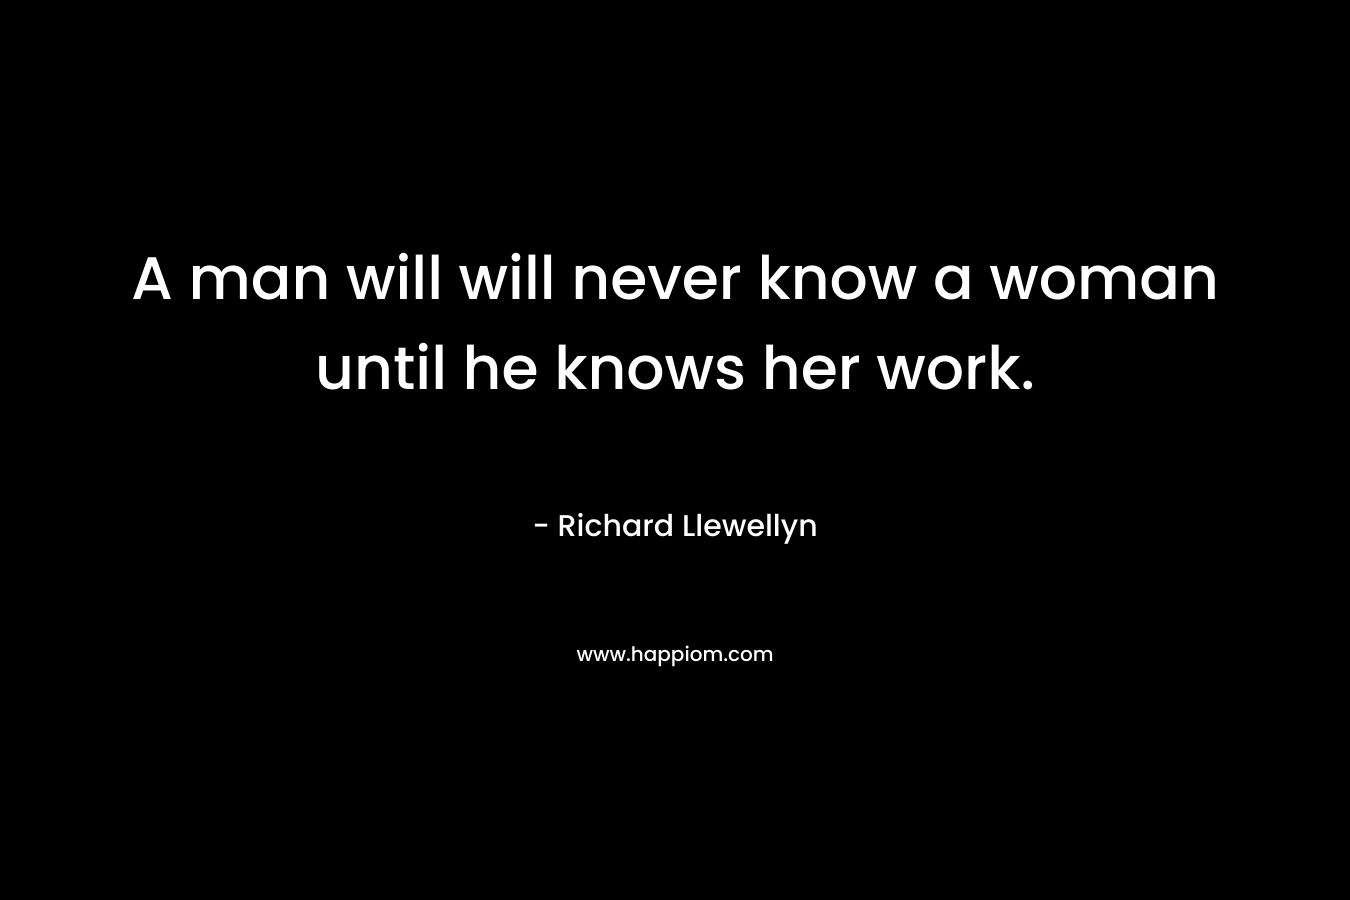 A man will will never know a woman until he knows her work.